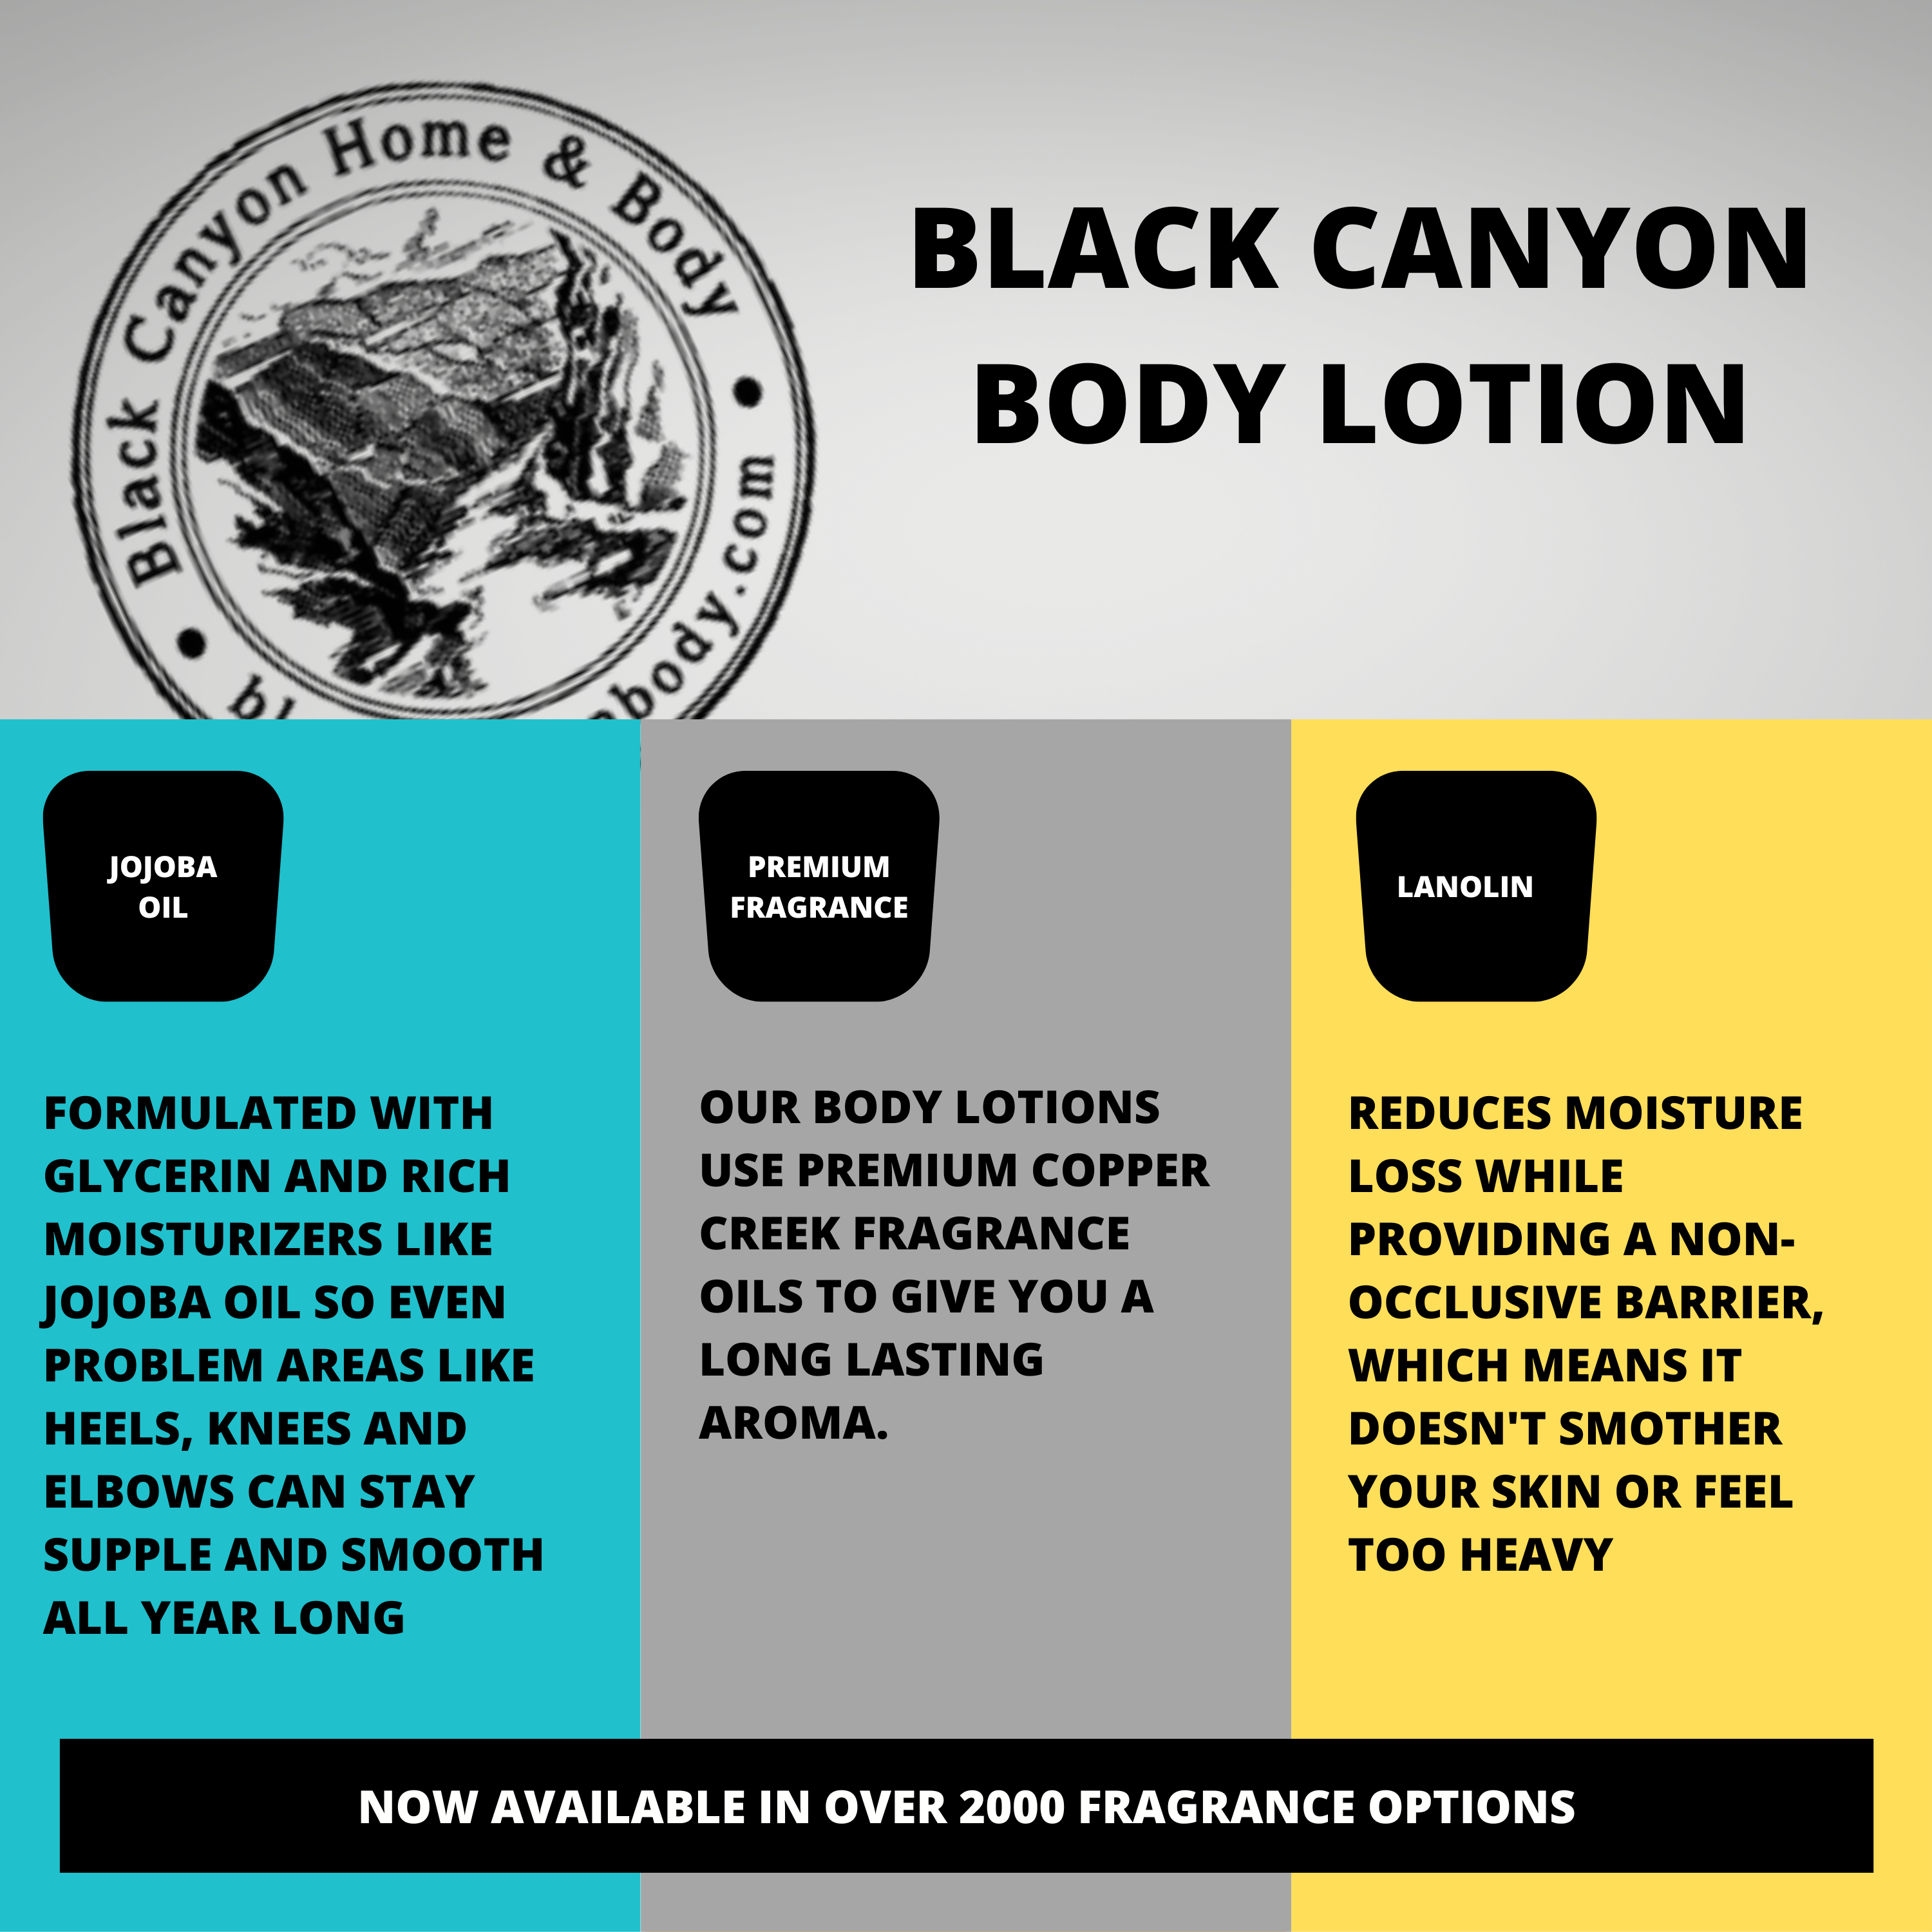 Black Canyon Apple Fritter Scented Luxury Body Lotion with Lanolin and Jojoba Oil